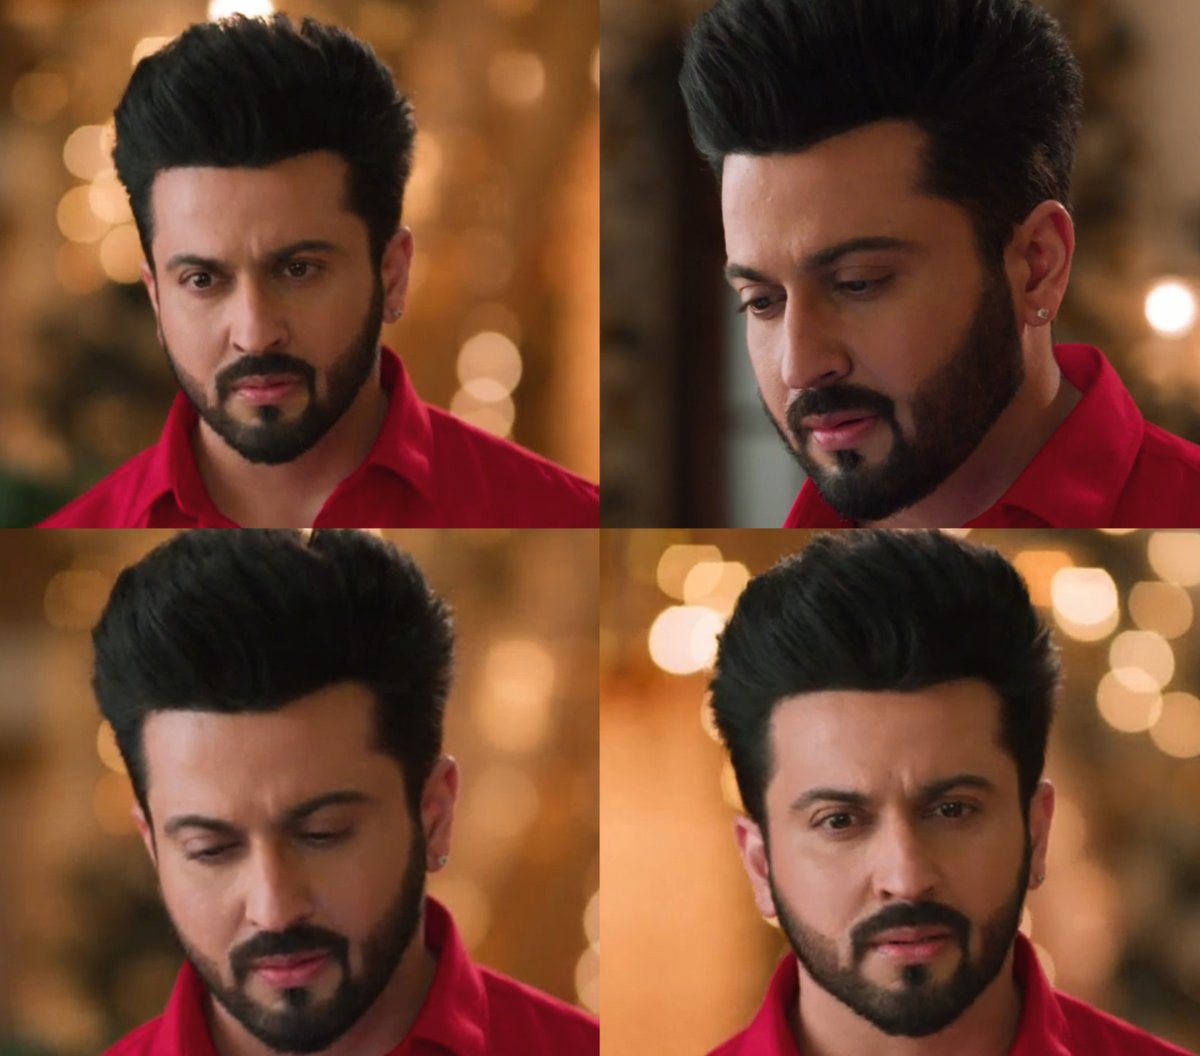 Subhaan has been doing his own research, i'm curious to know what he found out.

#DheerajDhoopar #SubhaanSiddiqui #RabbSeHaiDua